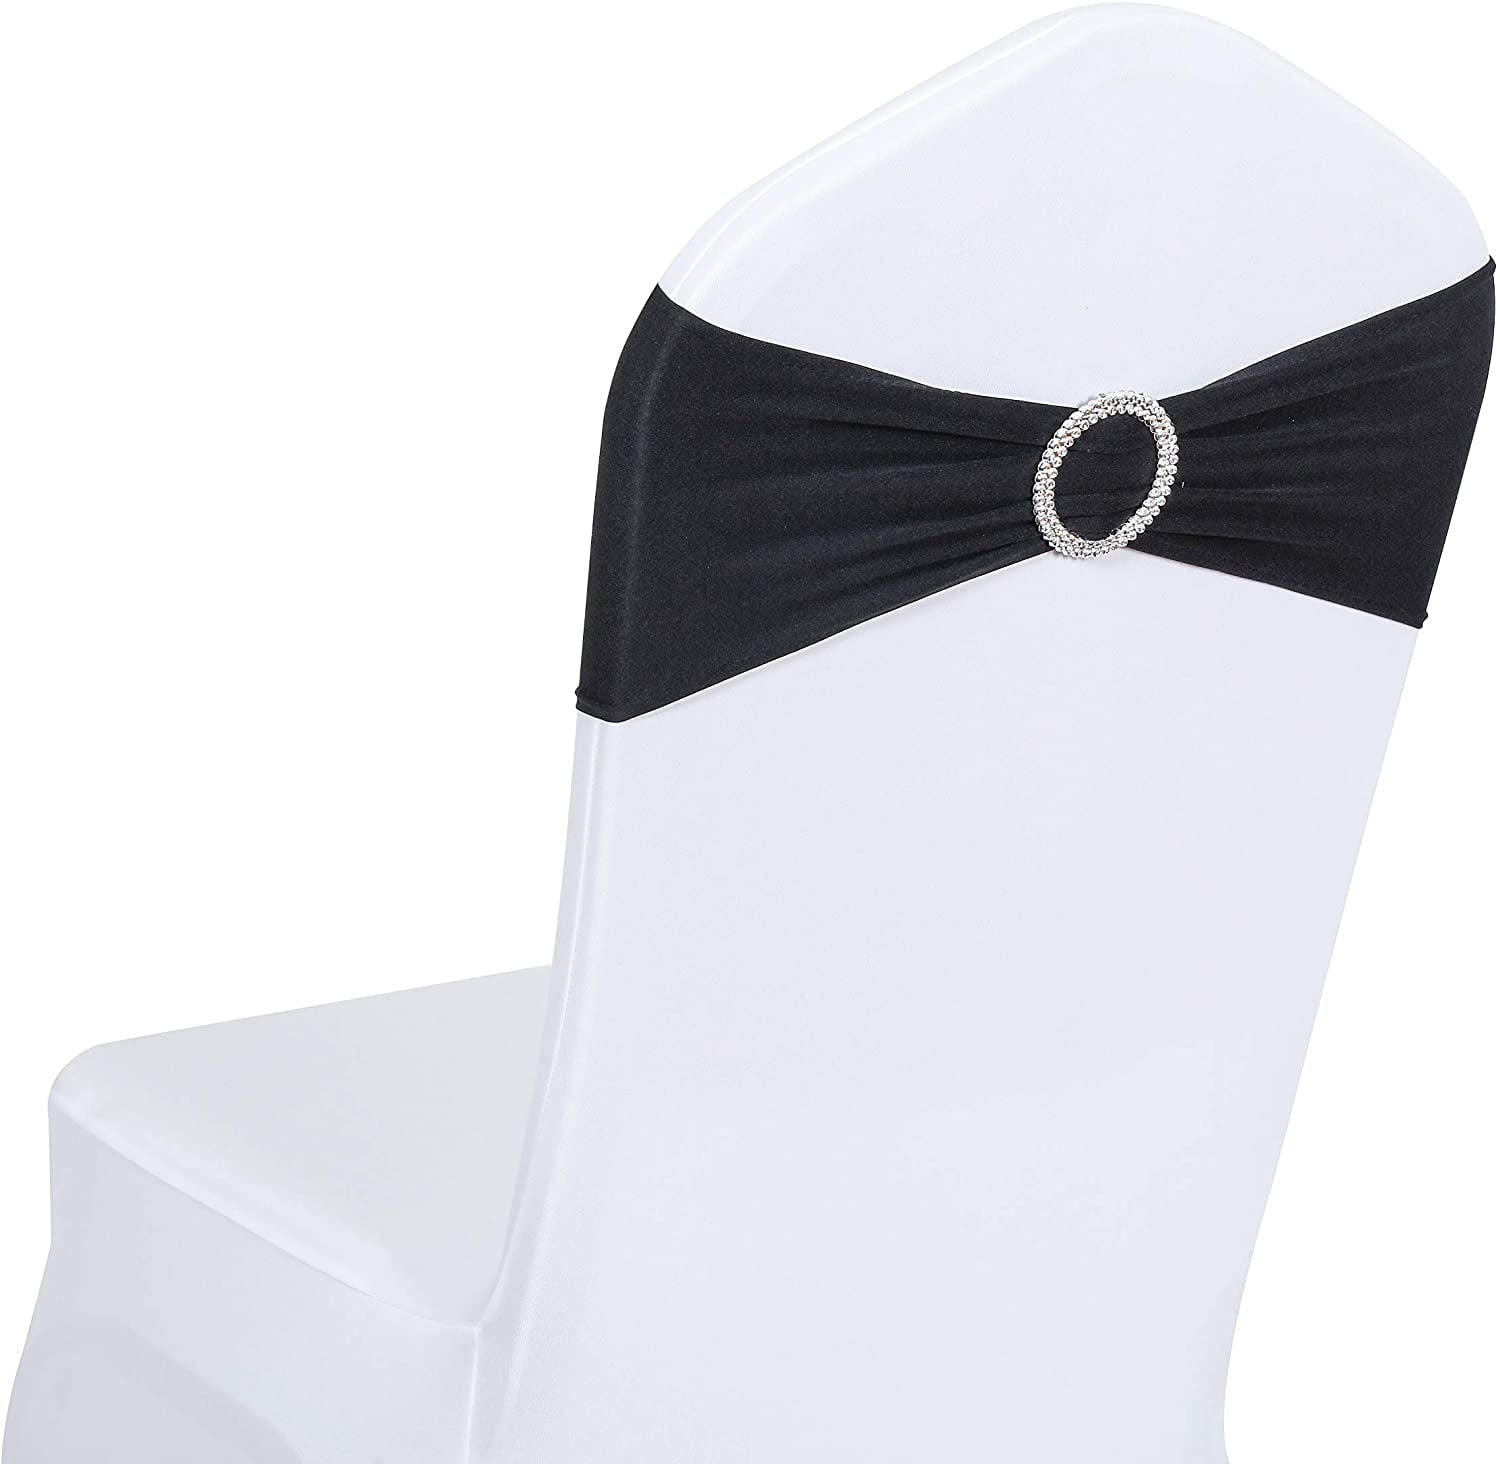 100PCS Spandex Stretch Wedding Party Chair Cover Band Sashes Buckle Bow Slider 